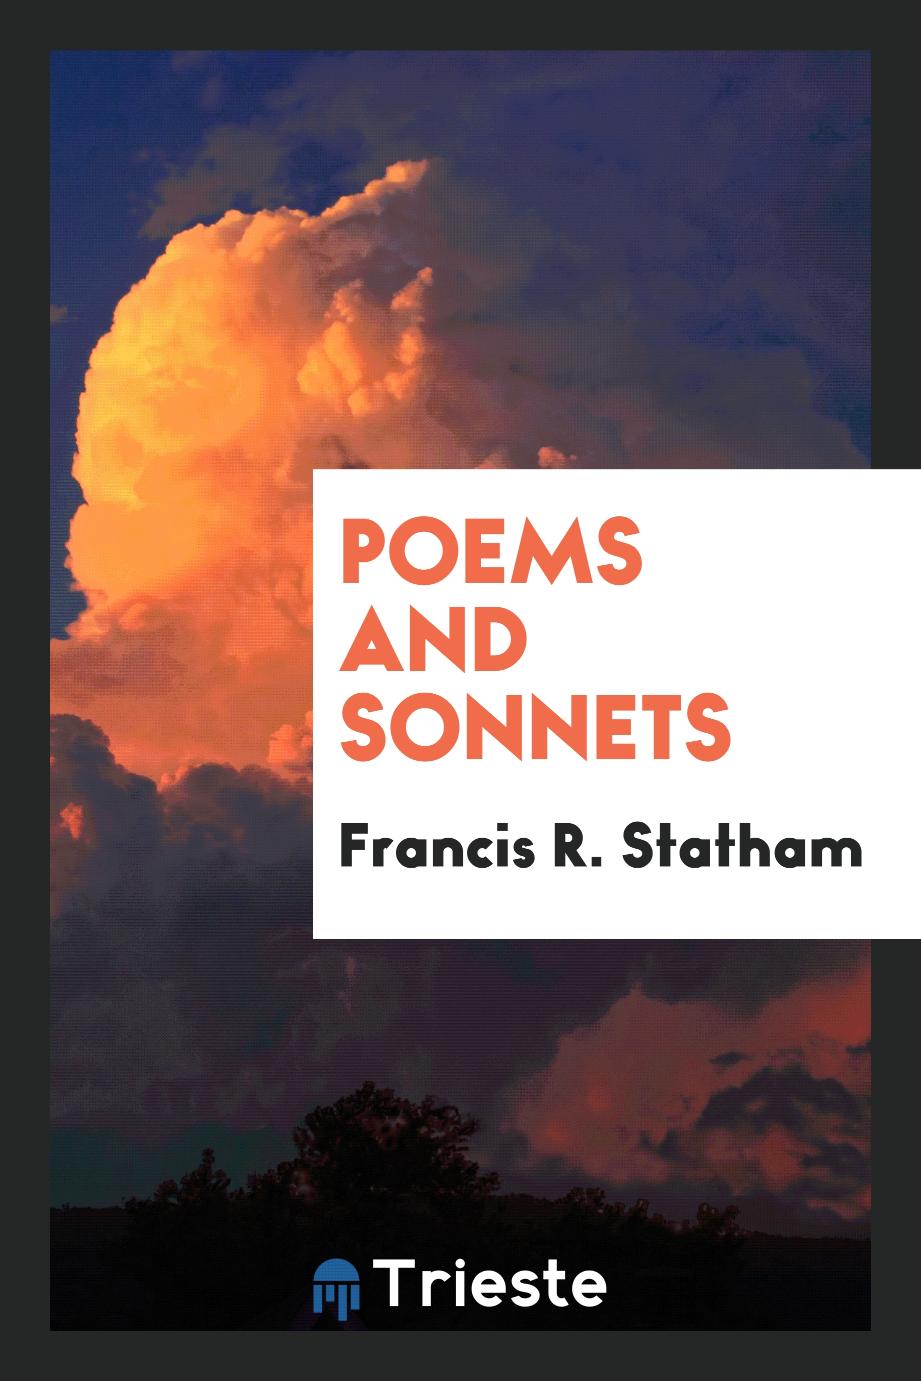 Poems and sonnets